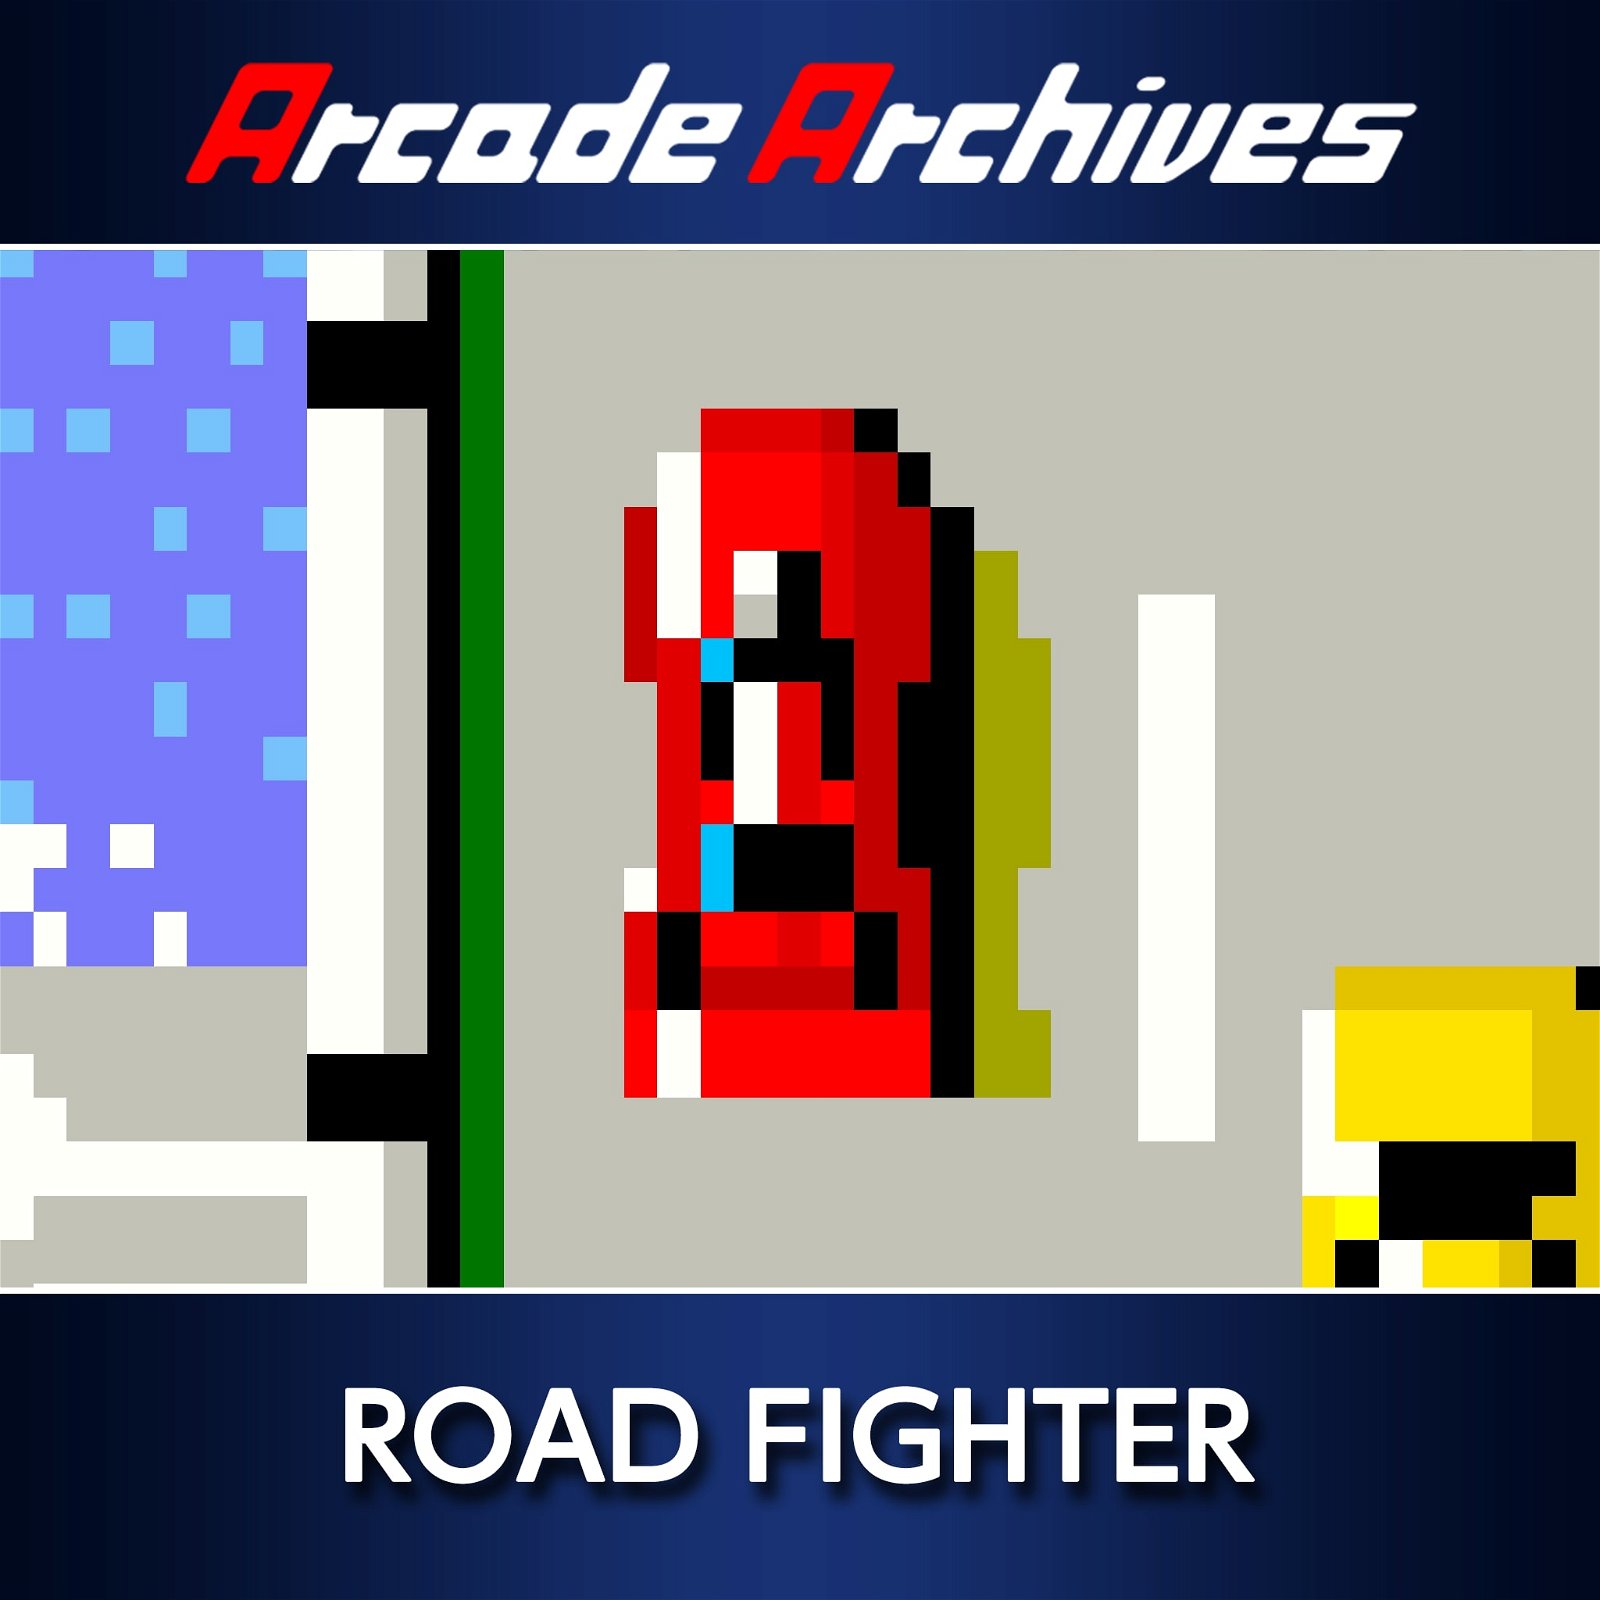 Image of Arcade Archives ROAD FIGHTER